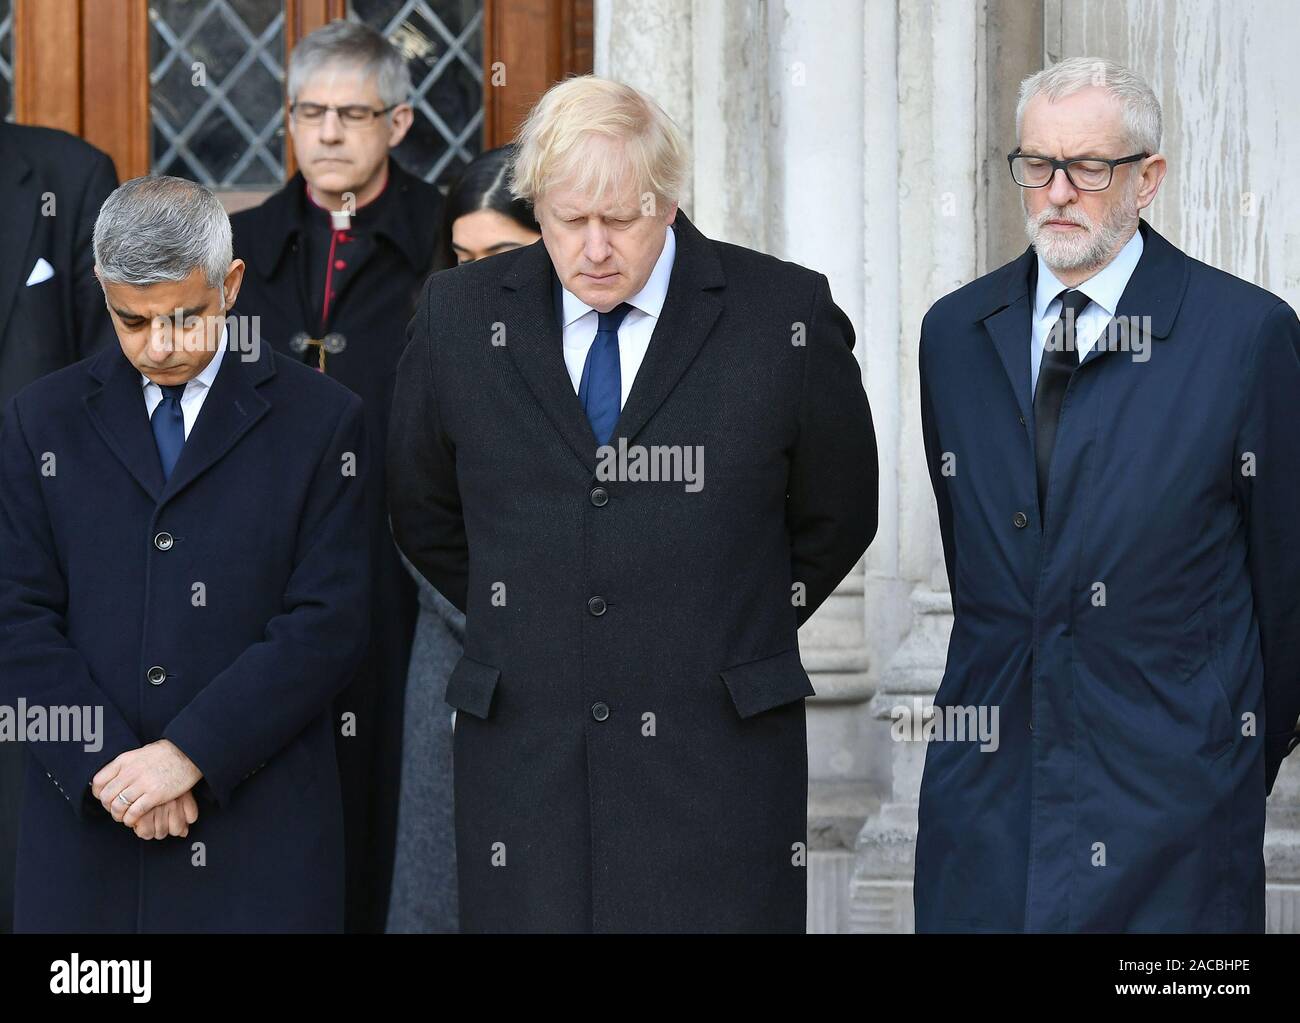 (left to right) Mayor of London Sadiq Khan, Prime Minister Boris Johnson and Labour leader Jeremy Corbyn take part in a vigil in Guildhall Yard, London, to honour the victims off the London Bridge terror attack, as well as the members of the public and emergency services who risked their lives to help others after a terrorist wearing a fake suicide vest went on a knife rampage killing two people, was shot dead by police on Friday. Stock Photo